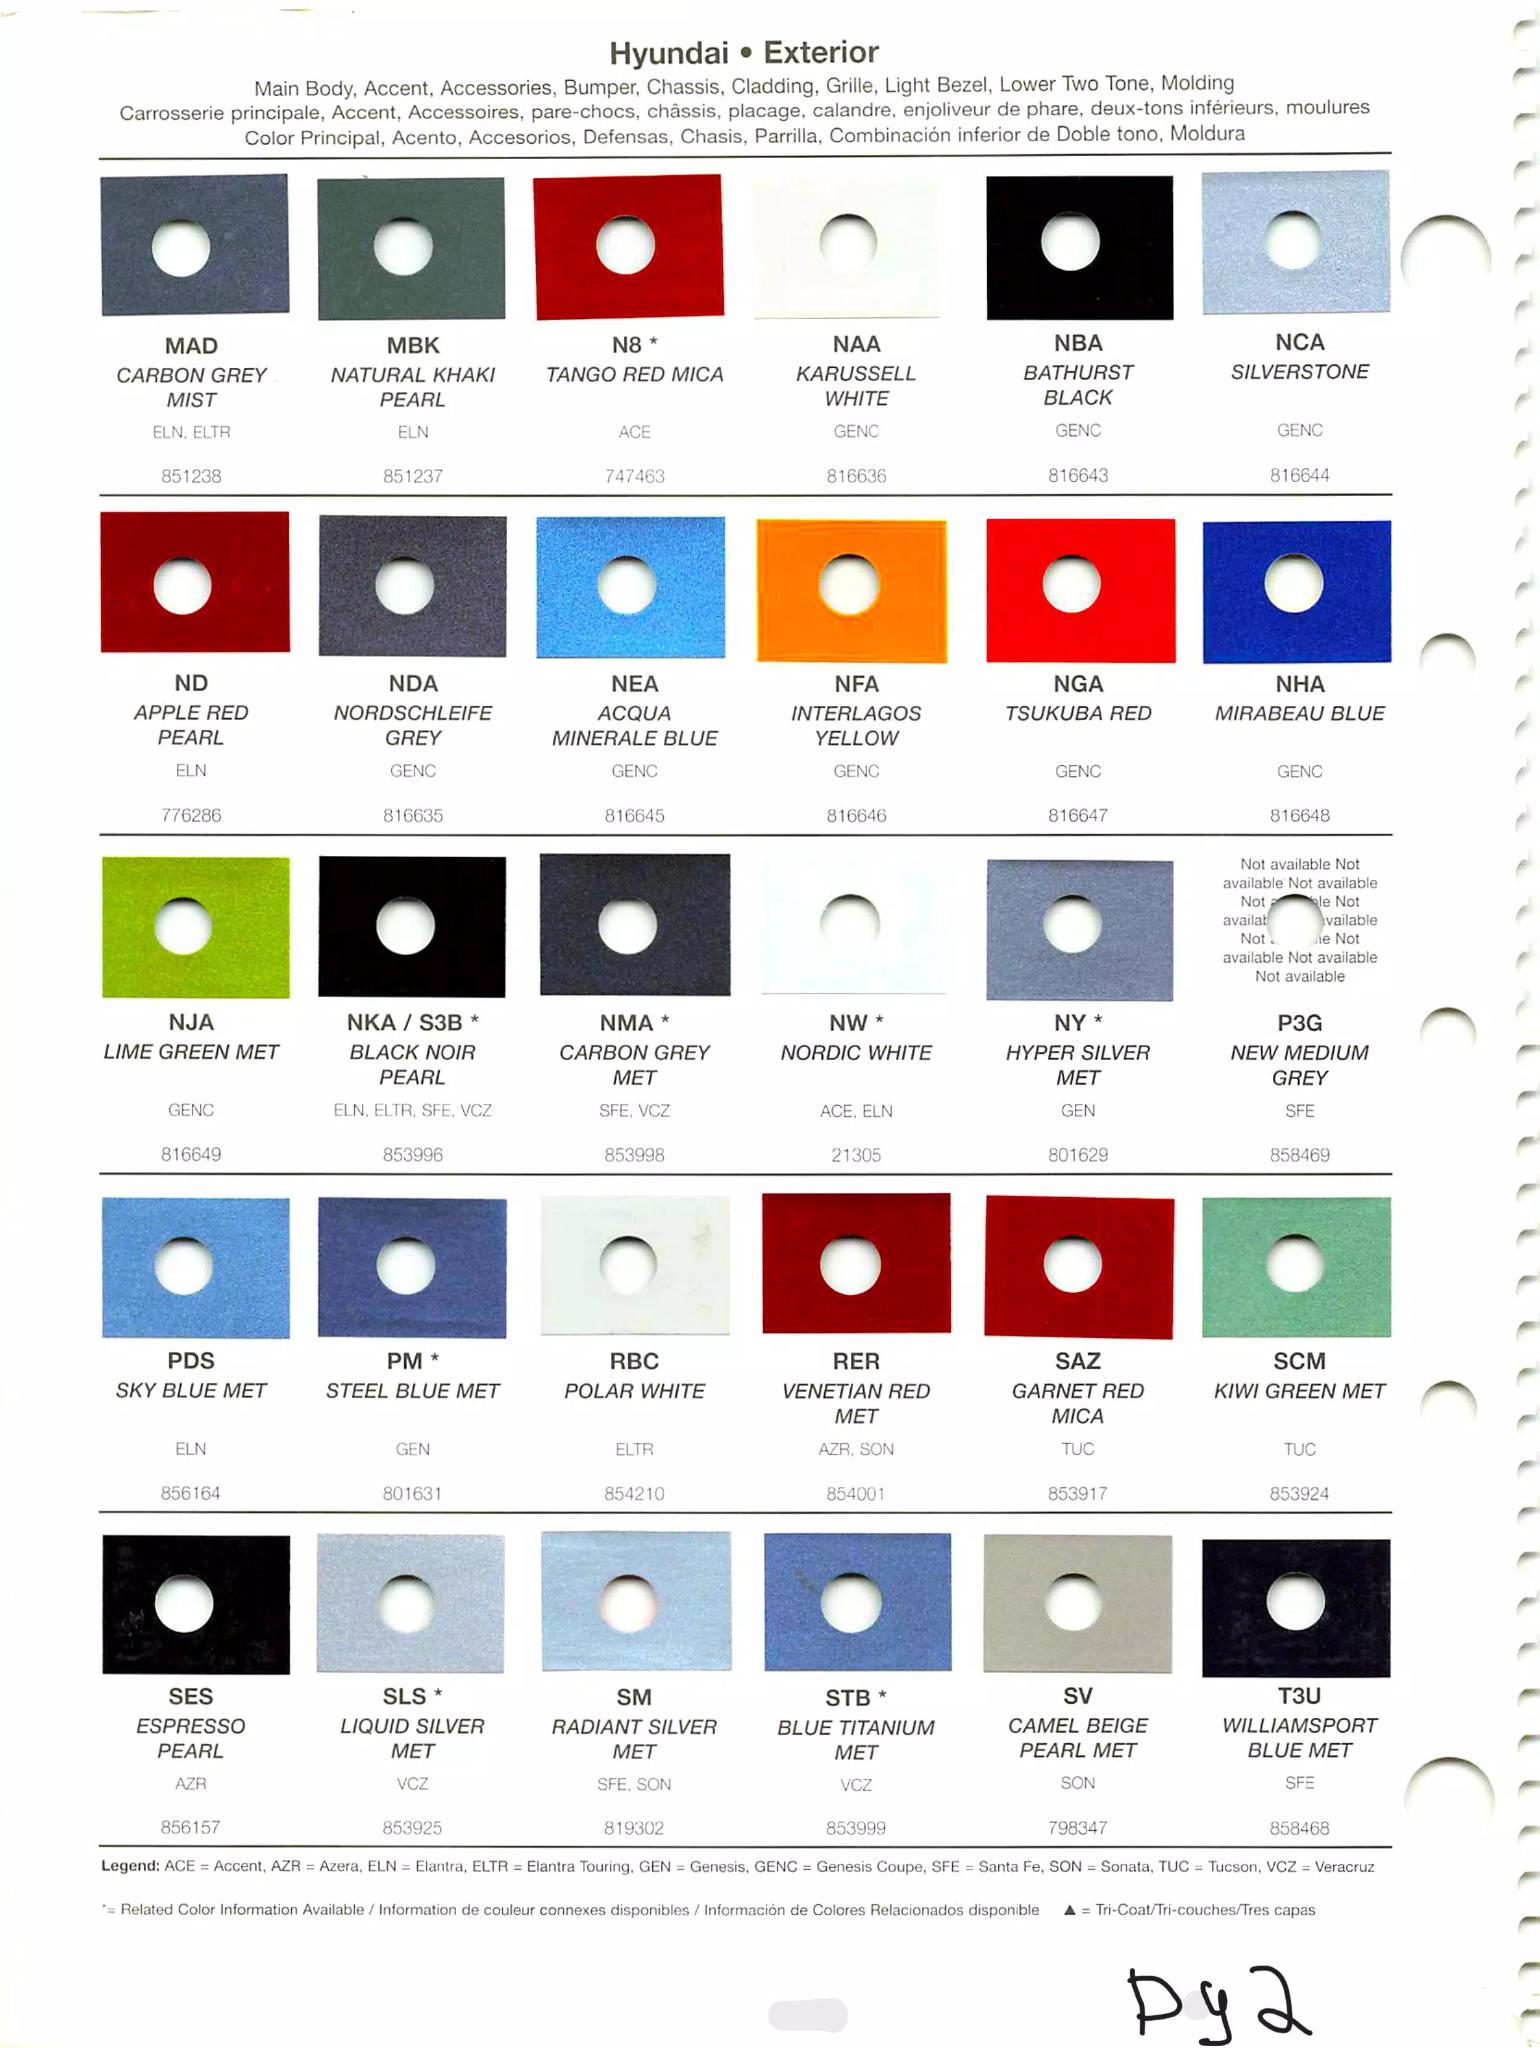 Paint color swatches, color names, mixing stock numbers, and the vehicle they go to for 2010 Hyundai automobiles.